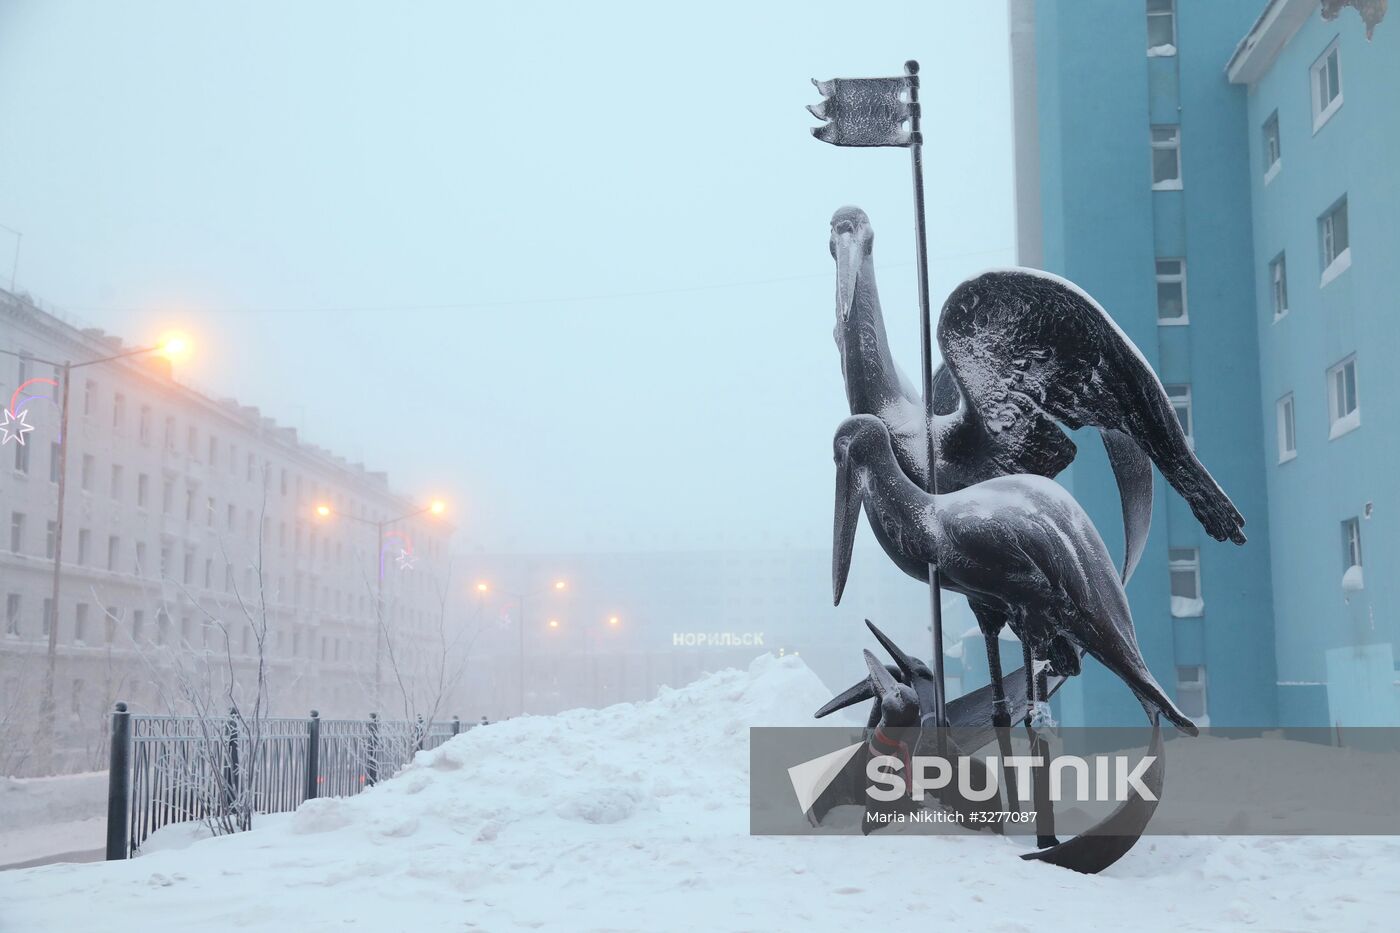 Russian regions hit by extremely cold weather